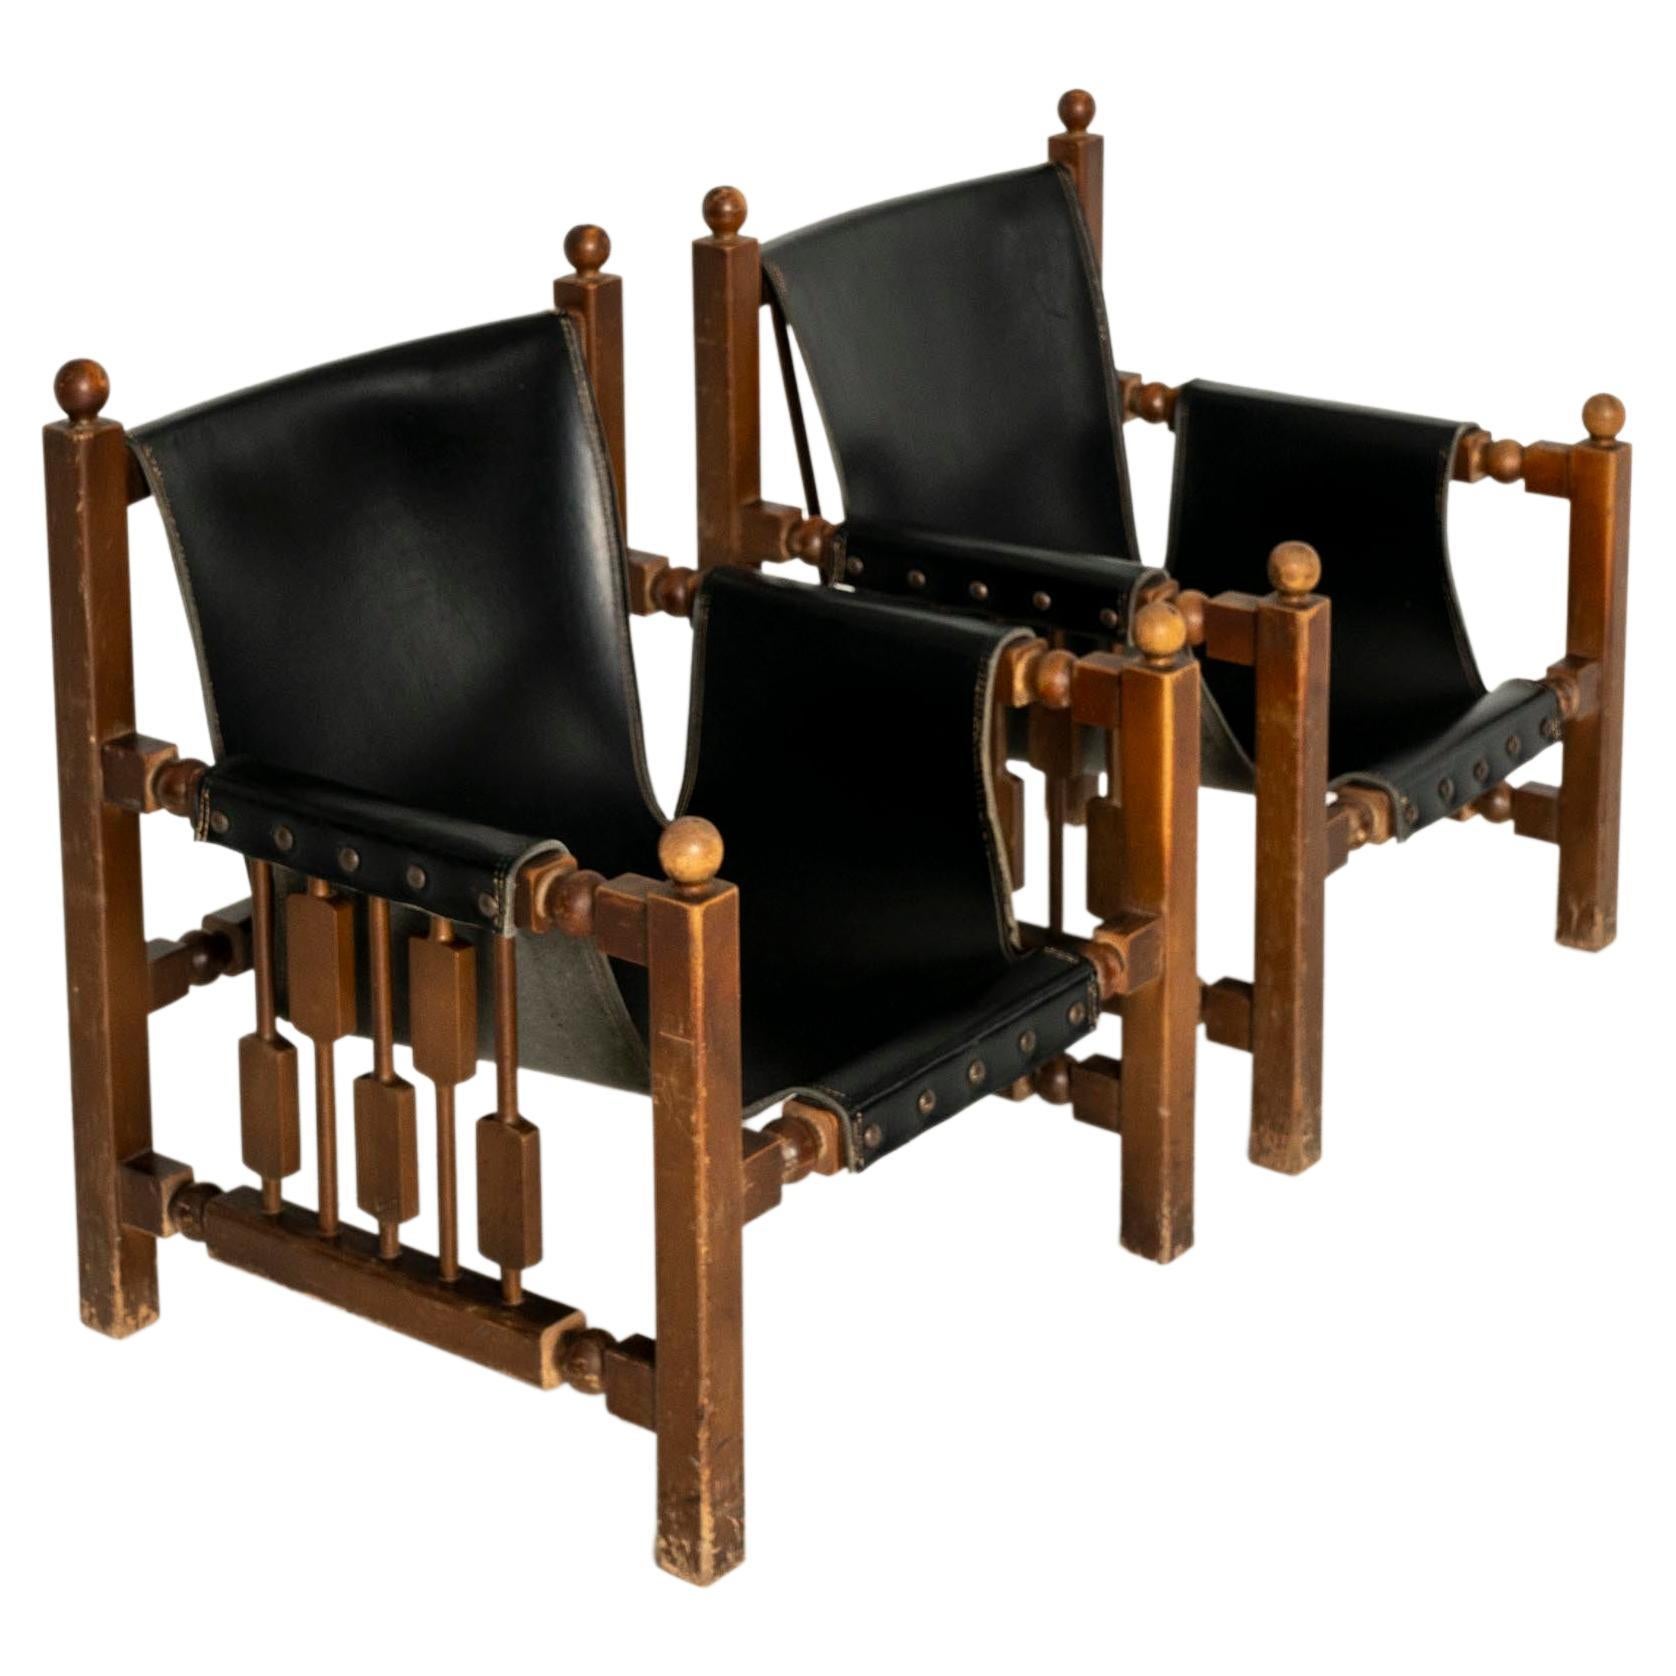 Brutalist Oak Chairs with Faux Leather in the Style of Charles Dudouyt, 1950s For Sale